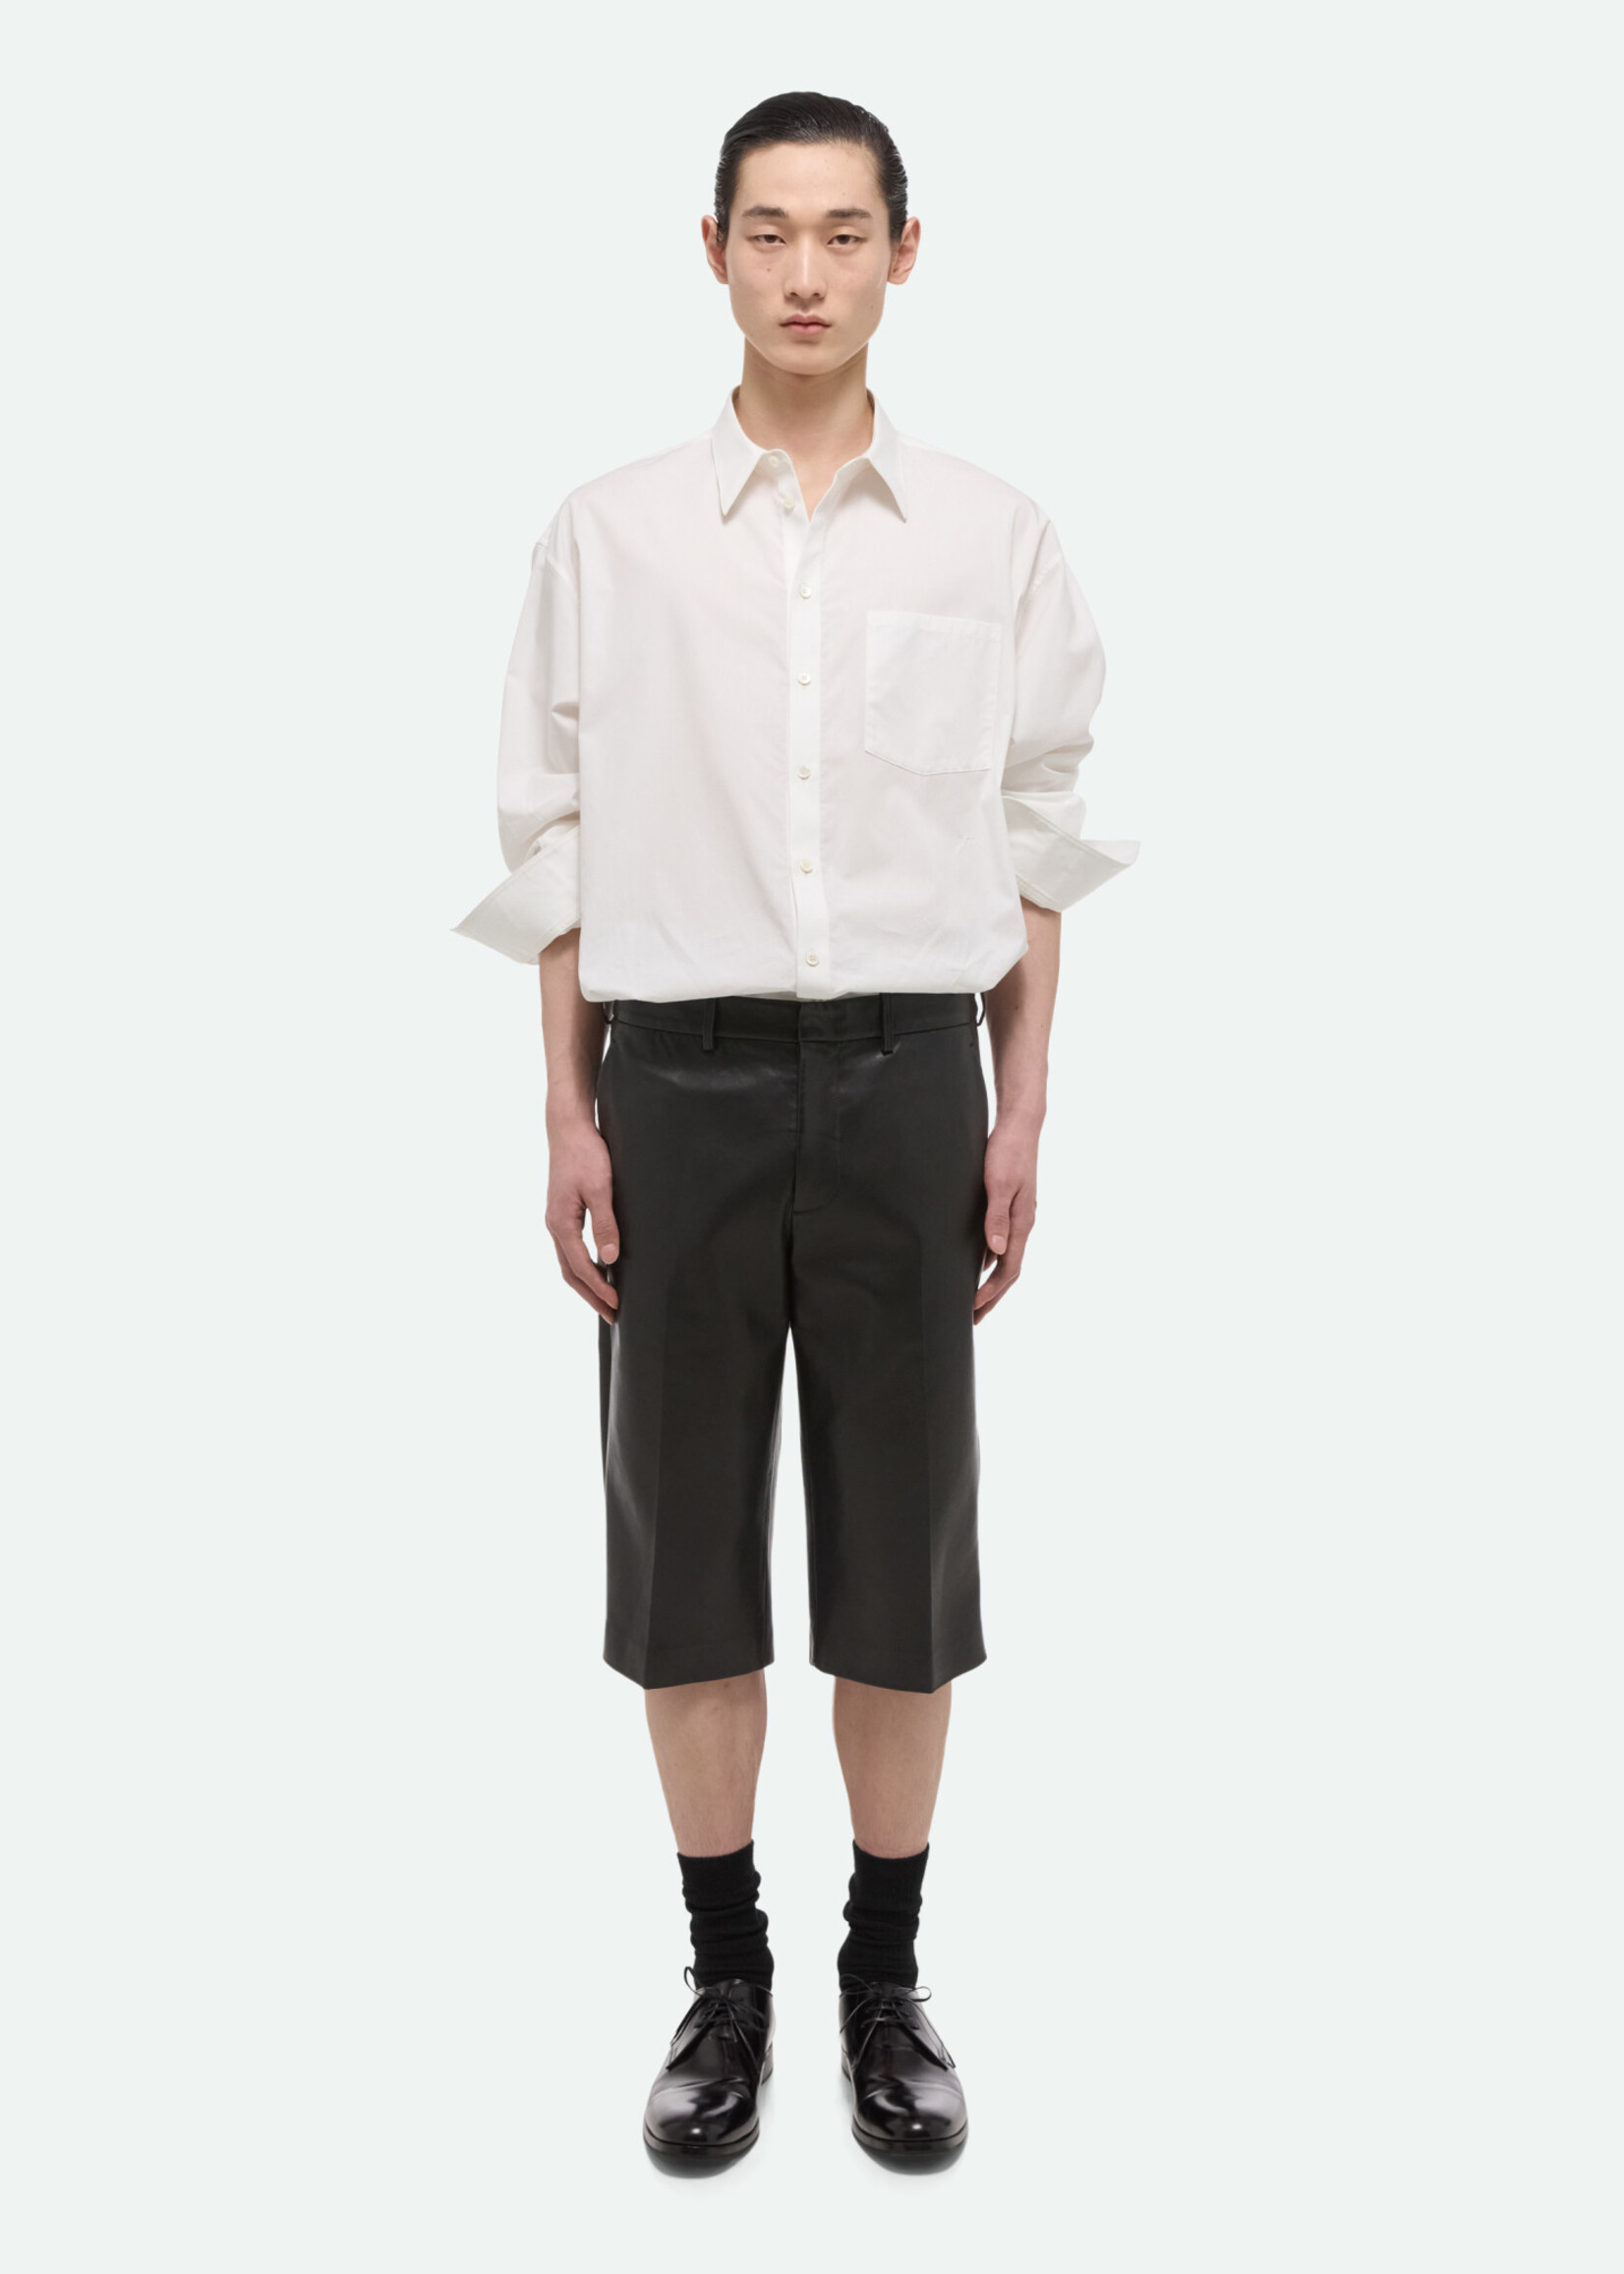 HELMUT LANG BY PETER DO Leather Car Short in Black